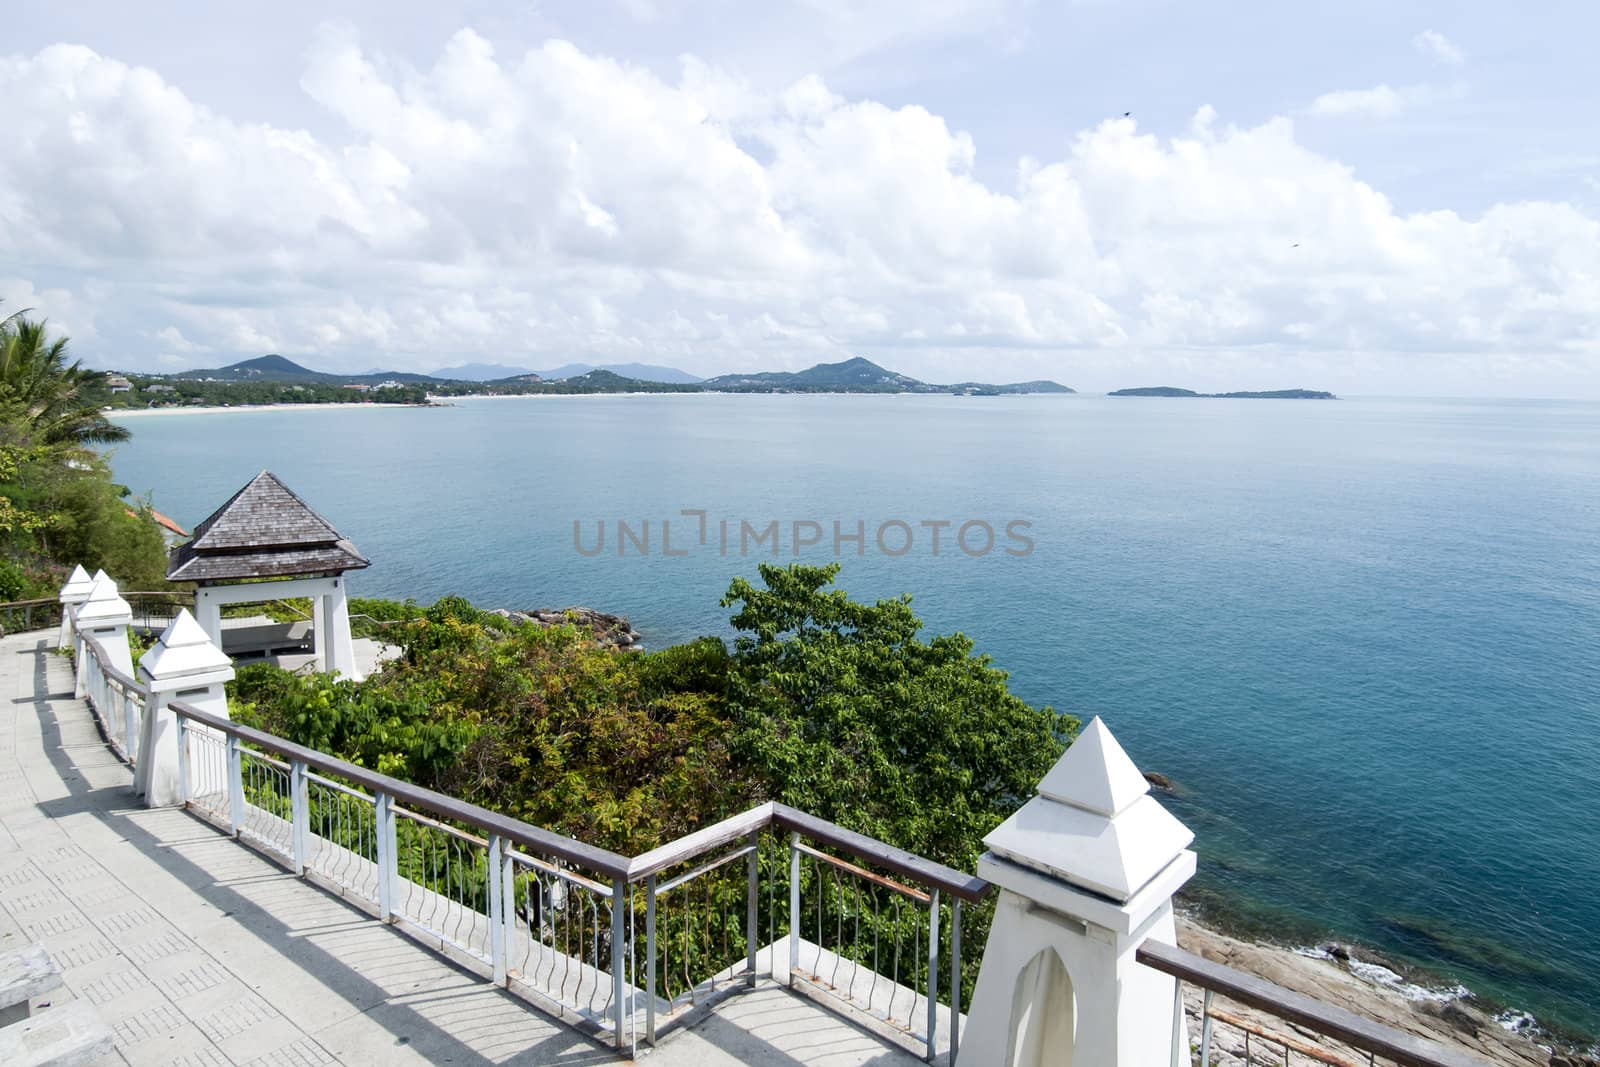 View point at Samui Island, Thailand by jakgree